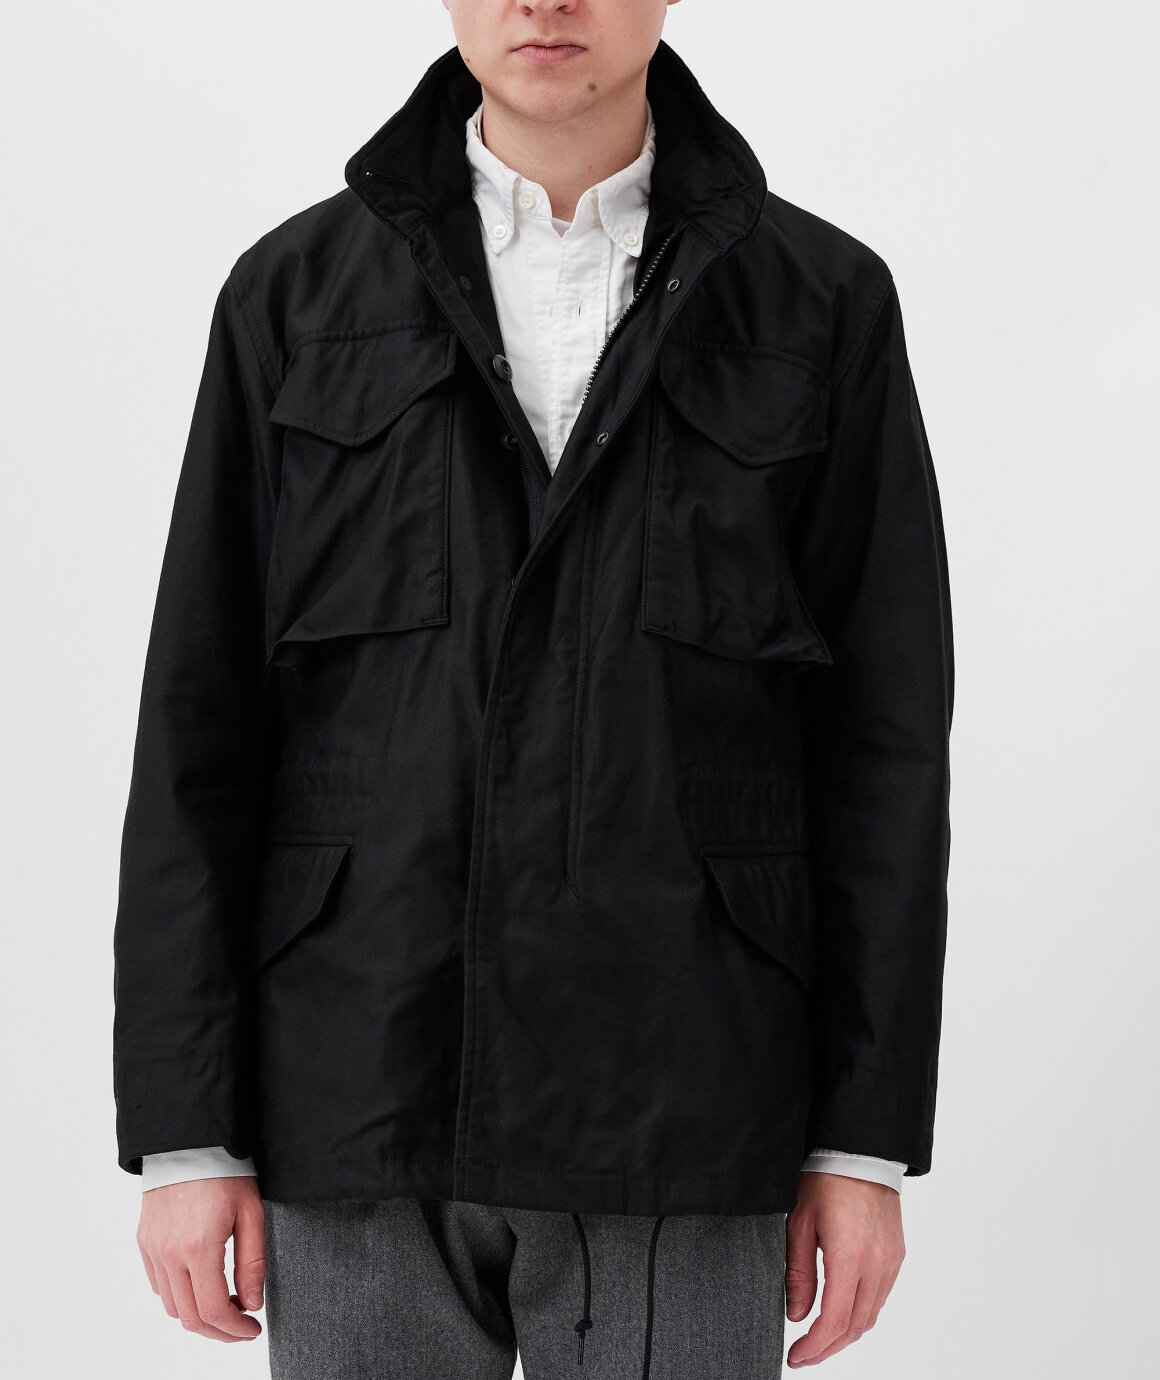 Norse Store | Shipping Worldwide - orSlow US ARMY M-65 FIELD JACKET - Black